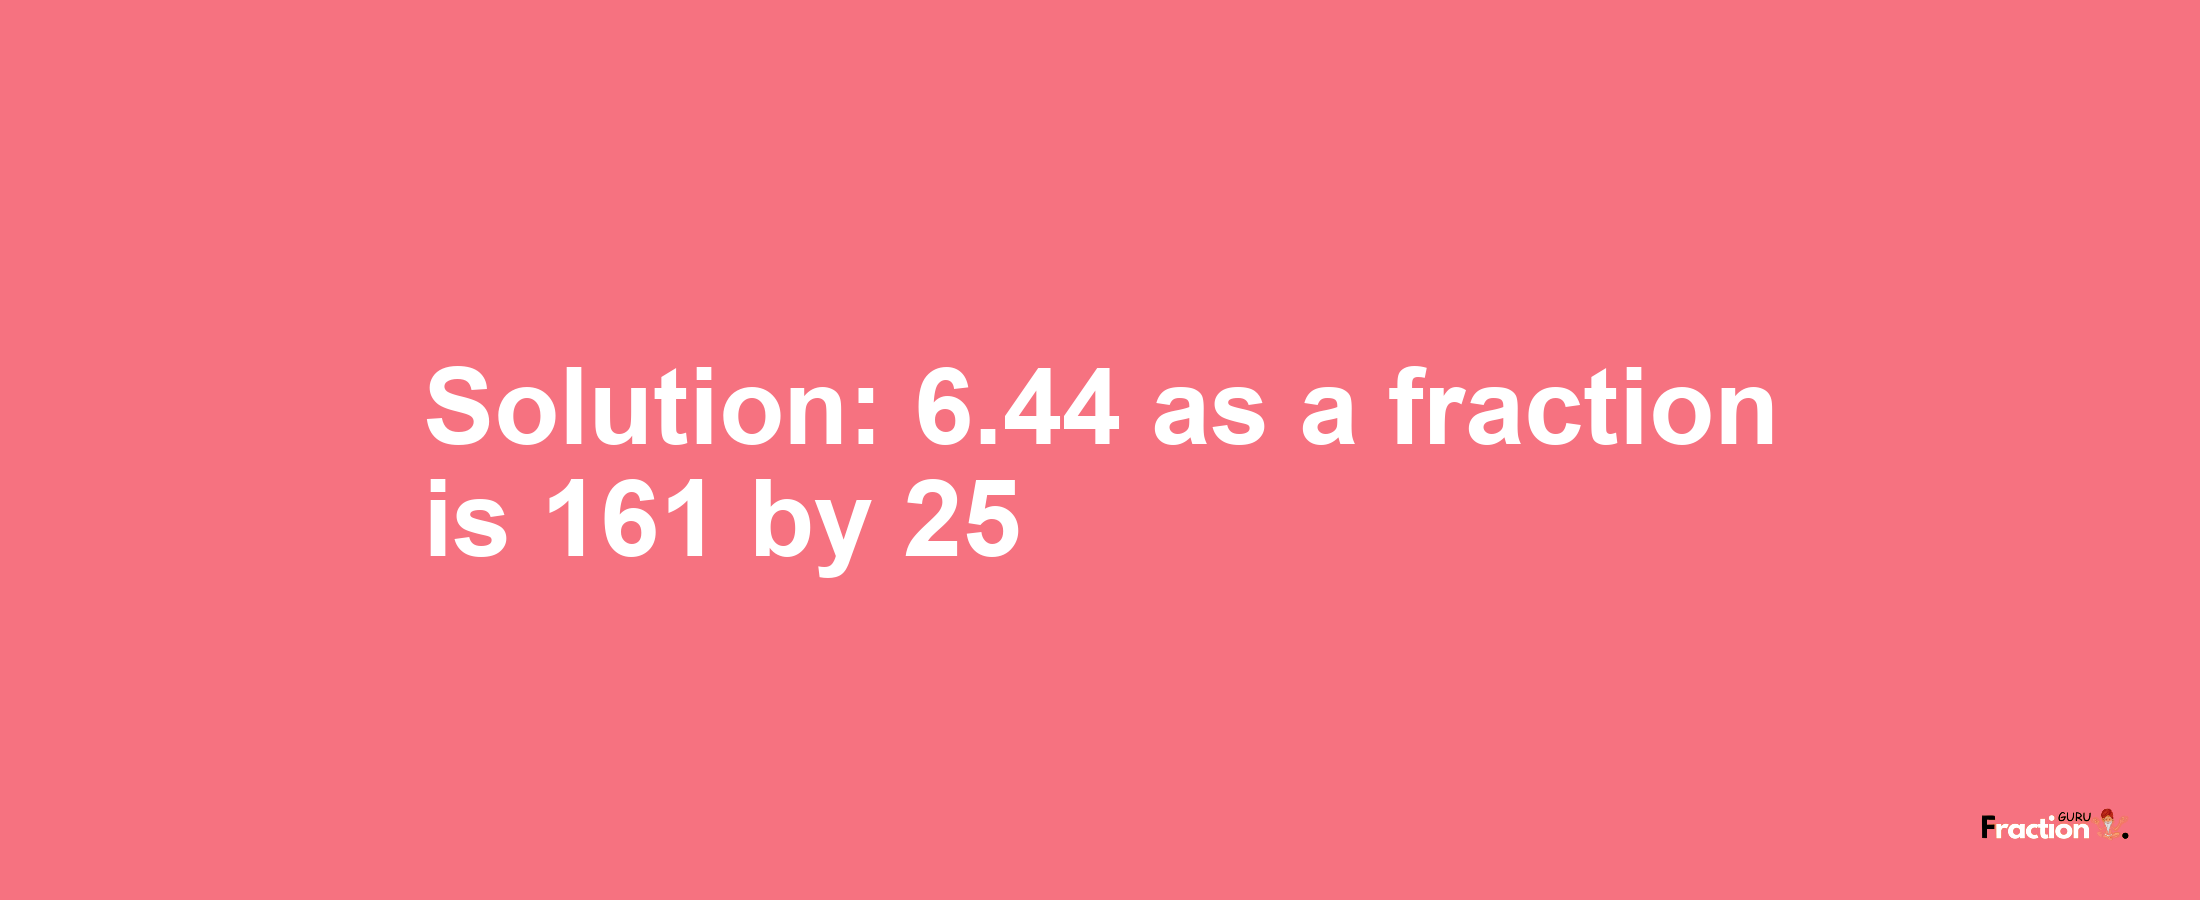 Solution:6.44 as a fraction is 161/25